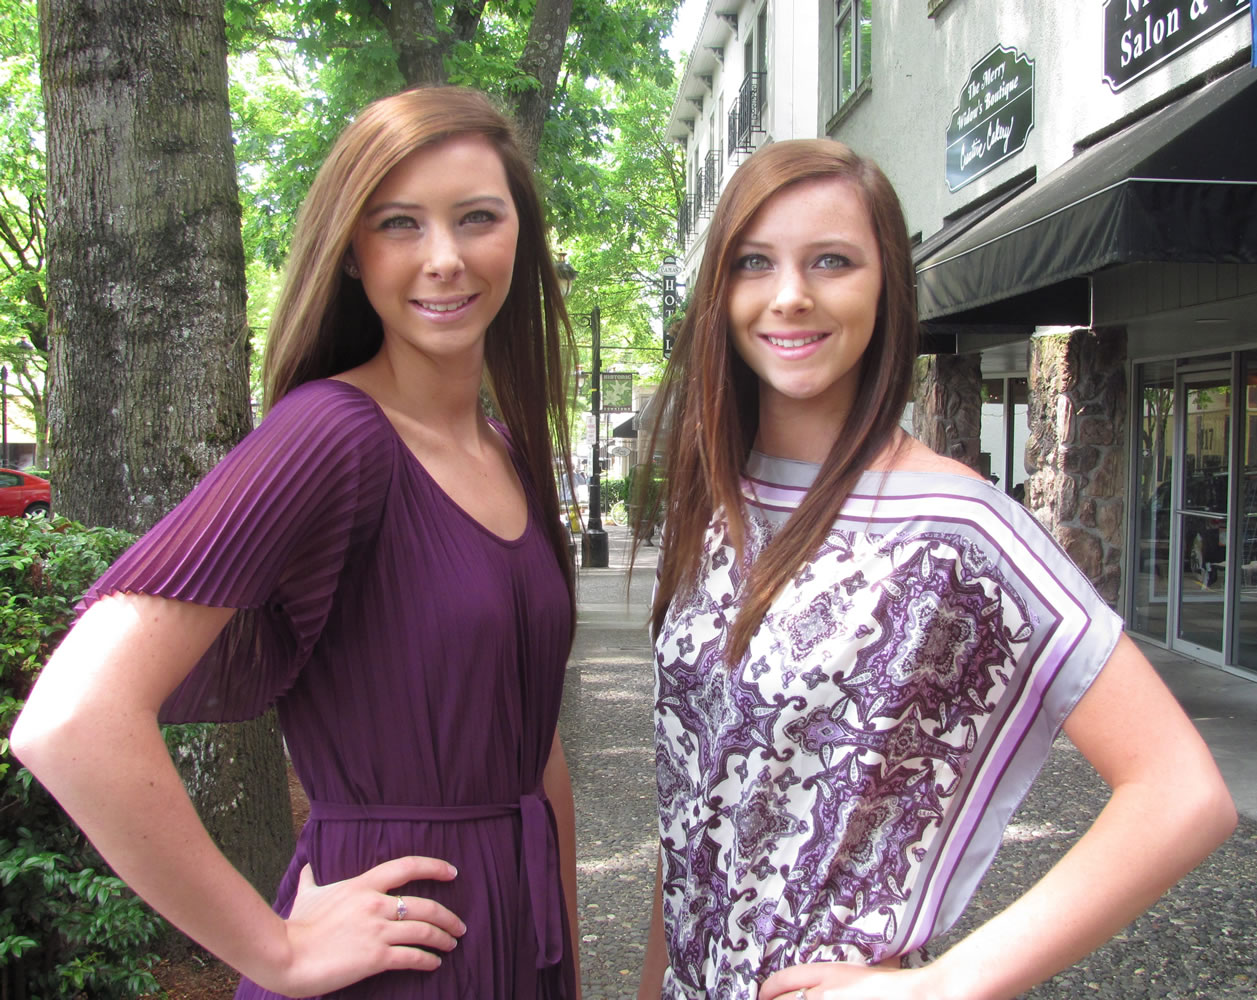 Identical twins Brandi (left) and Brittni Nester have kept busy modeling handbags and designer clothing this summer.